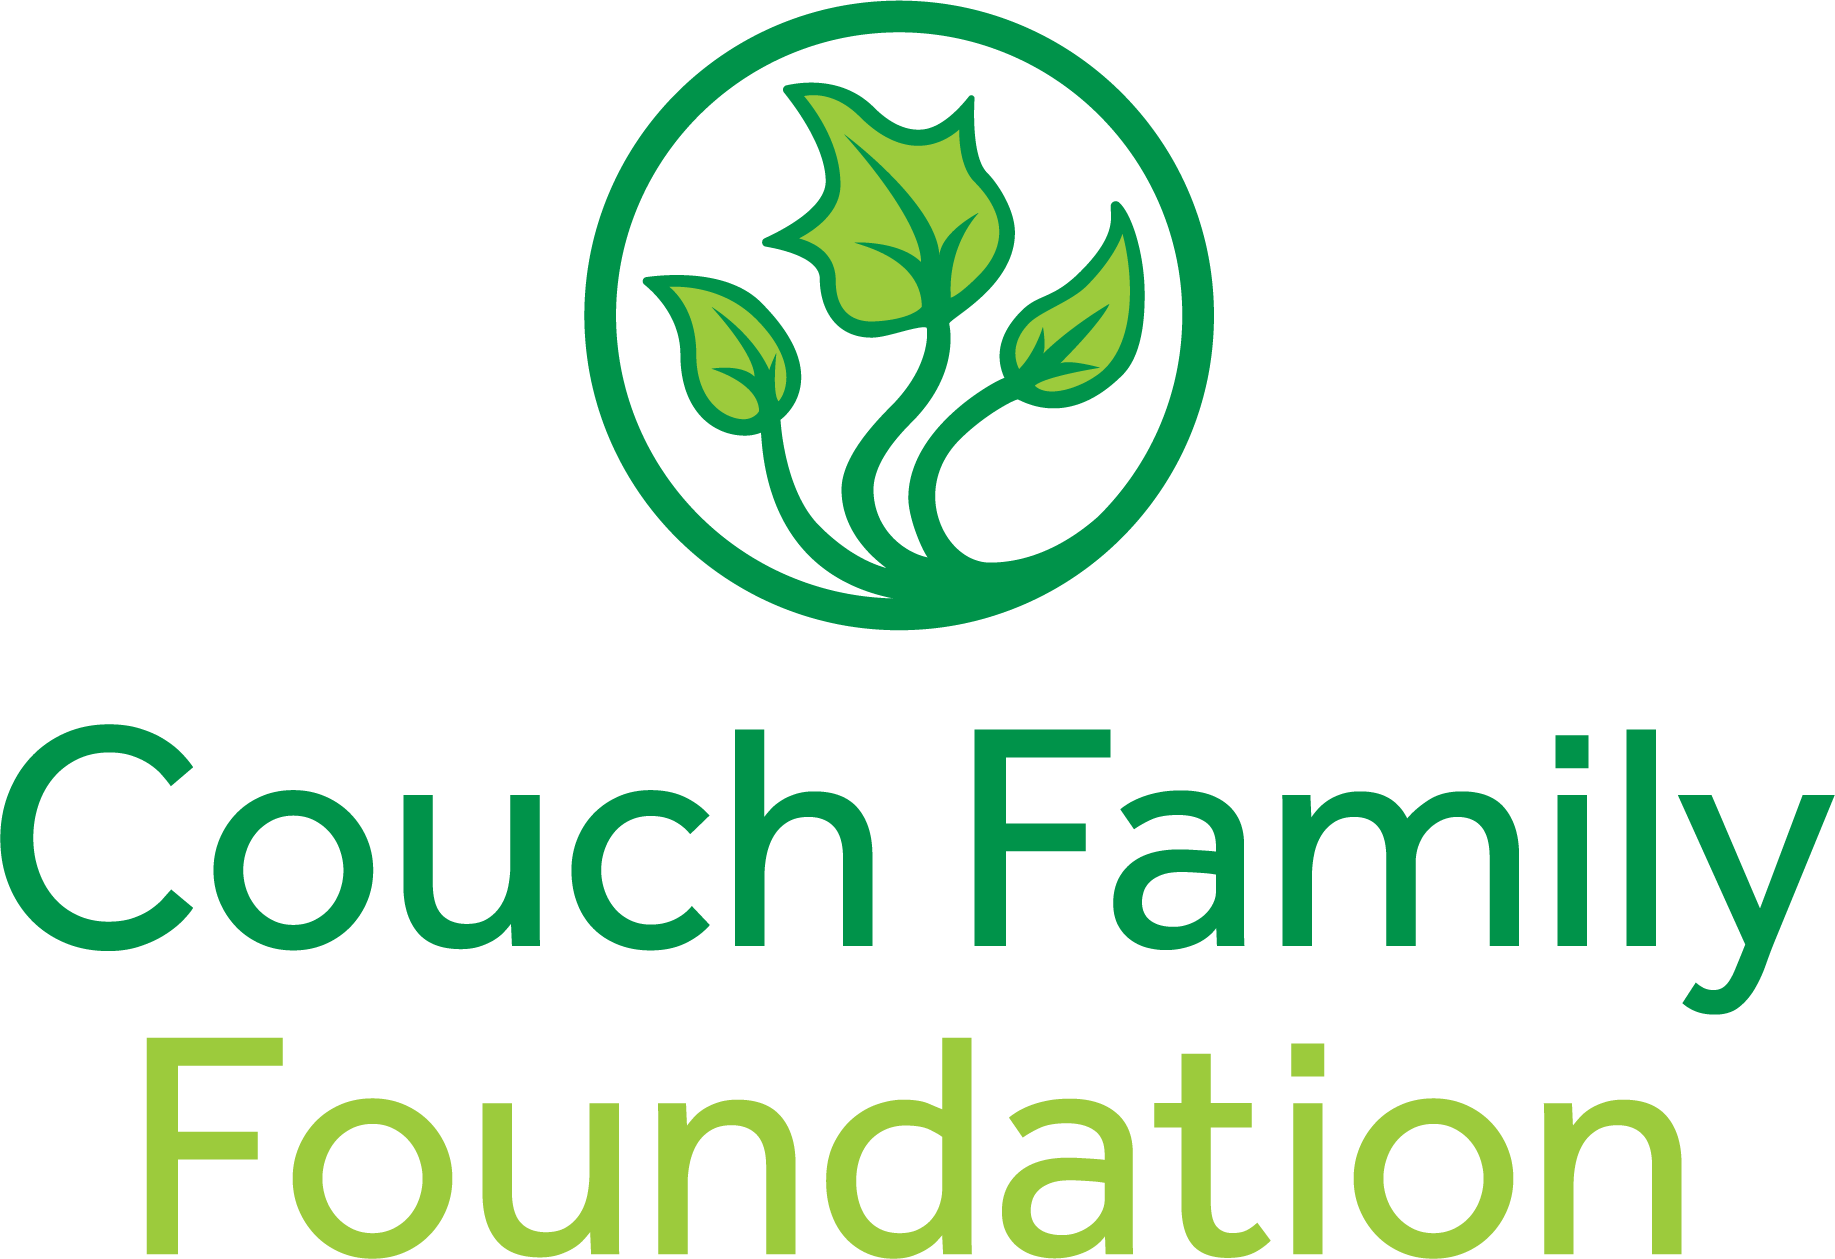 The Couch Family Foundation